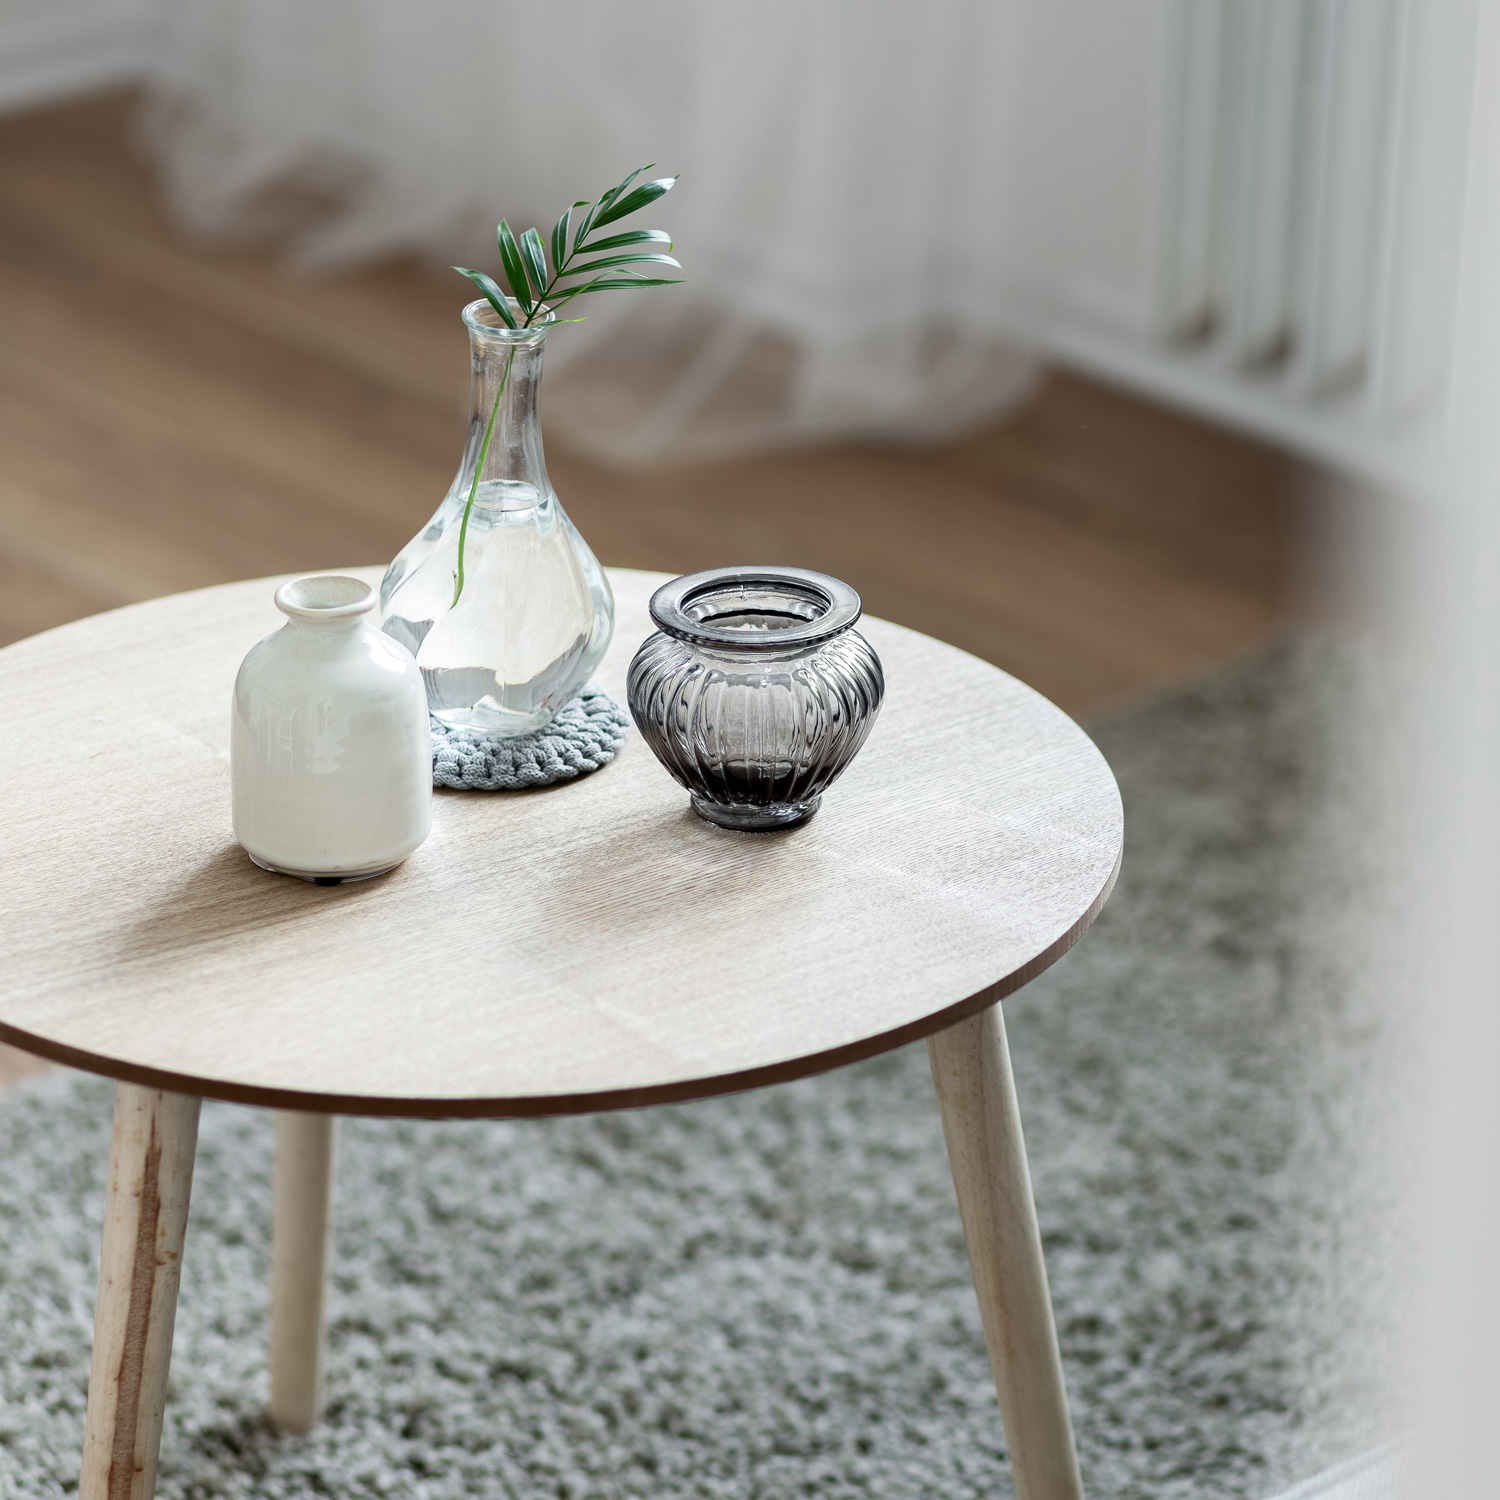 Home interior with scandinavian style wooden, round coffee table